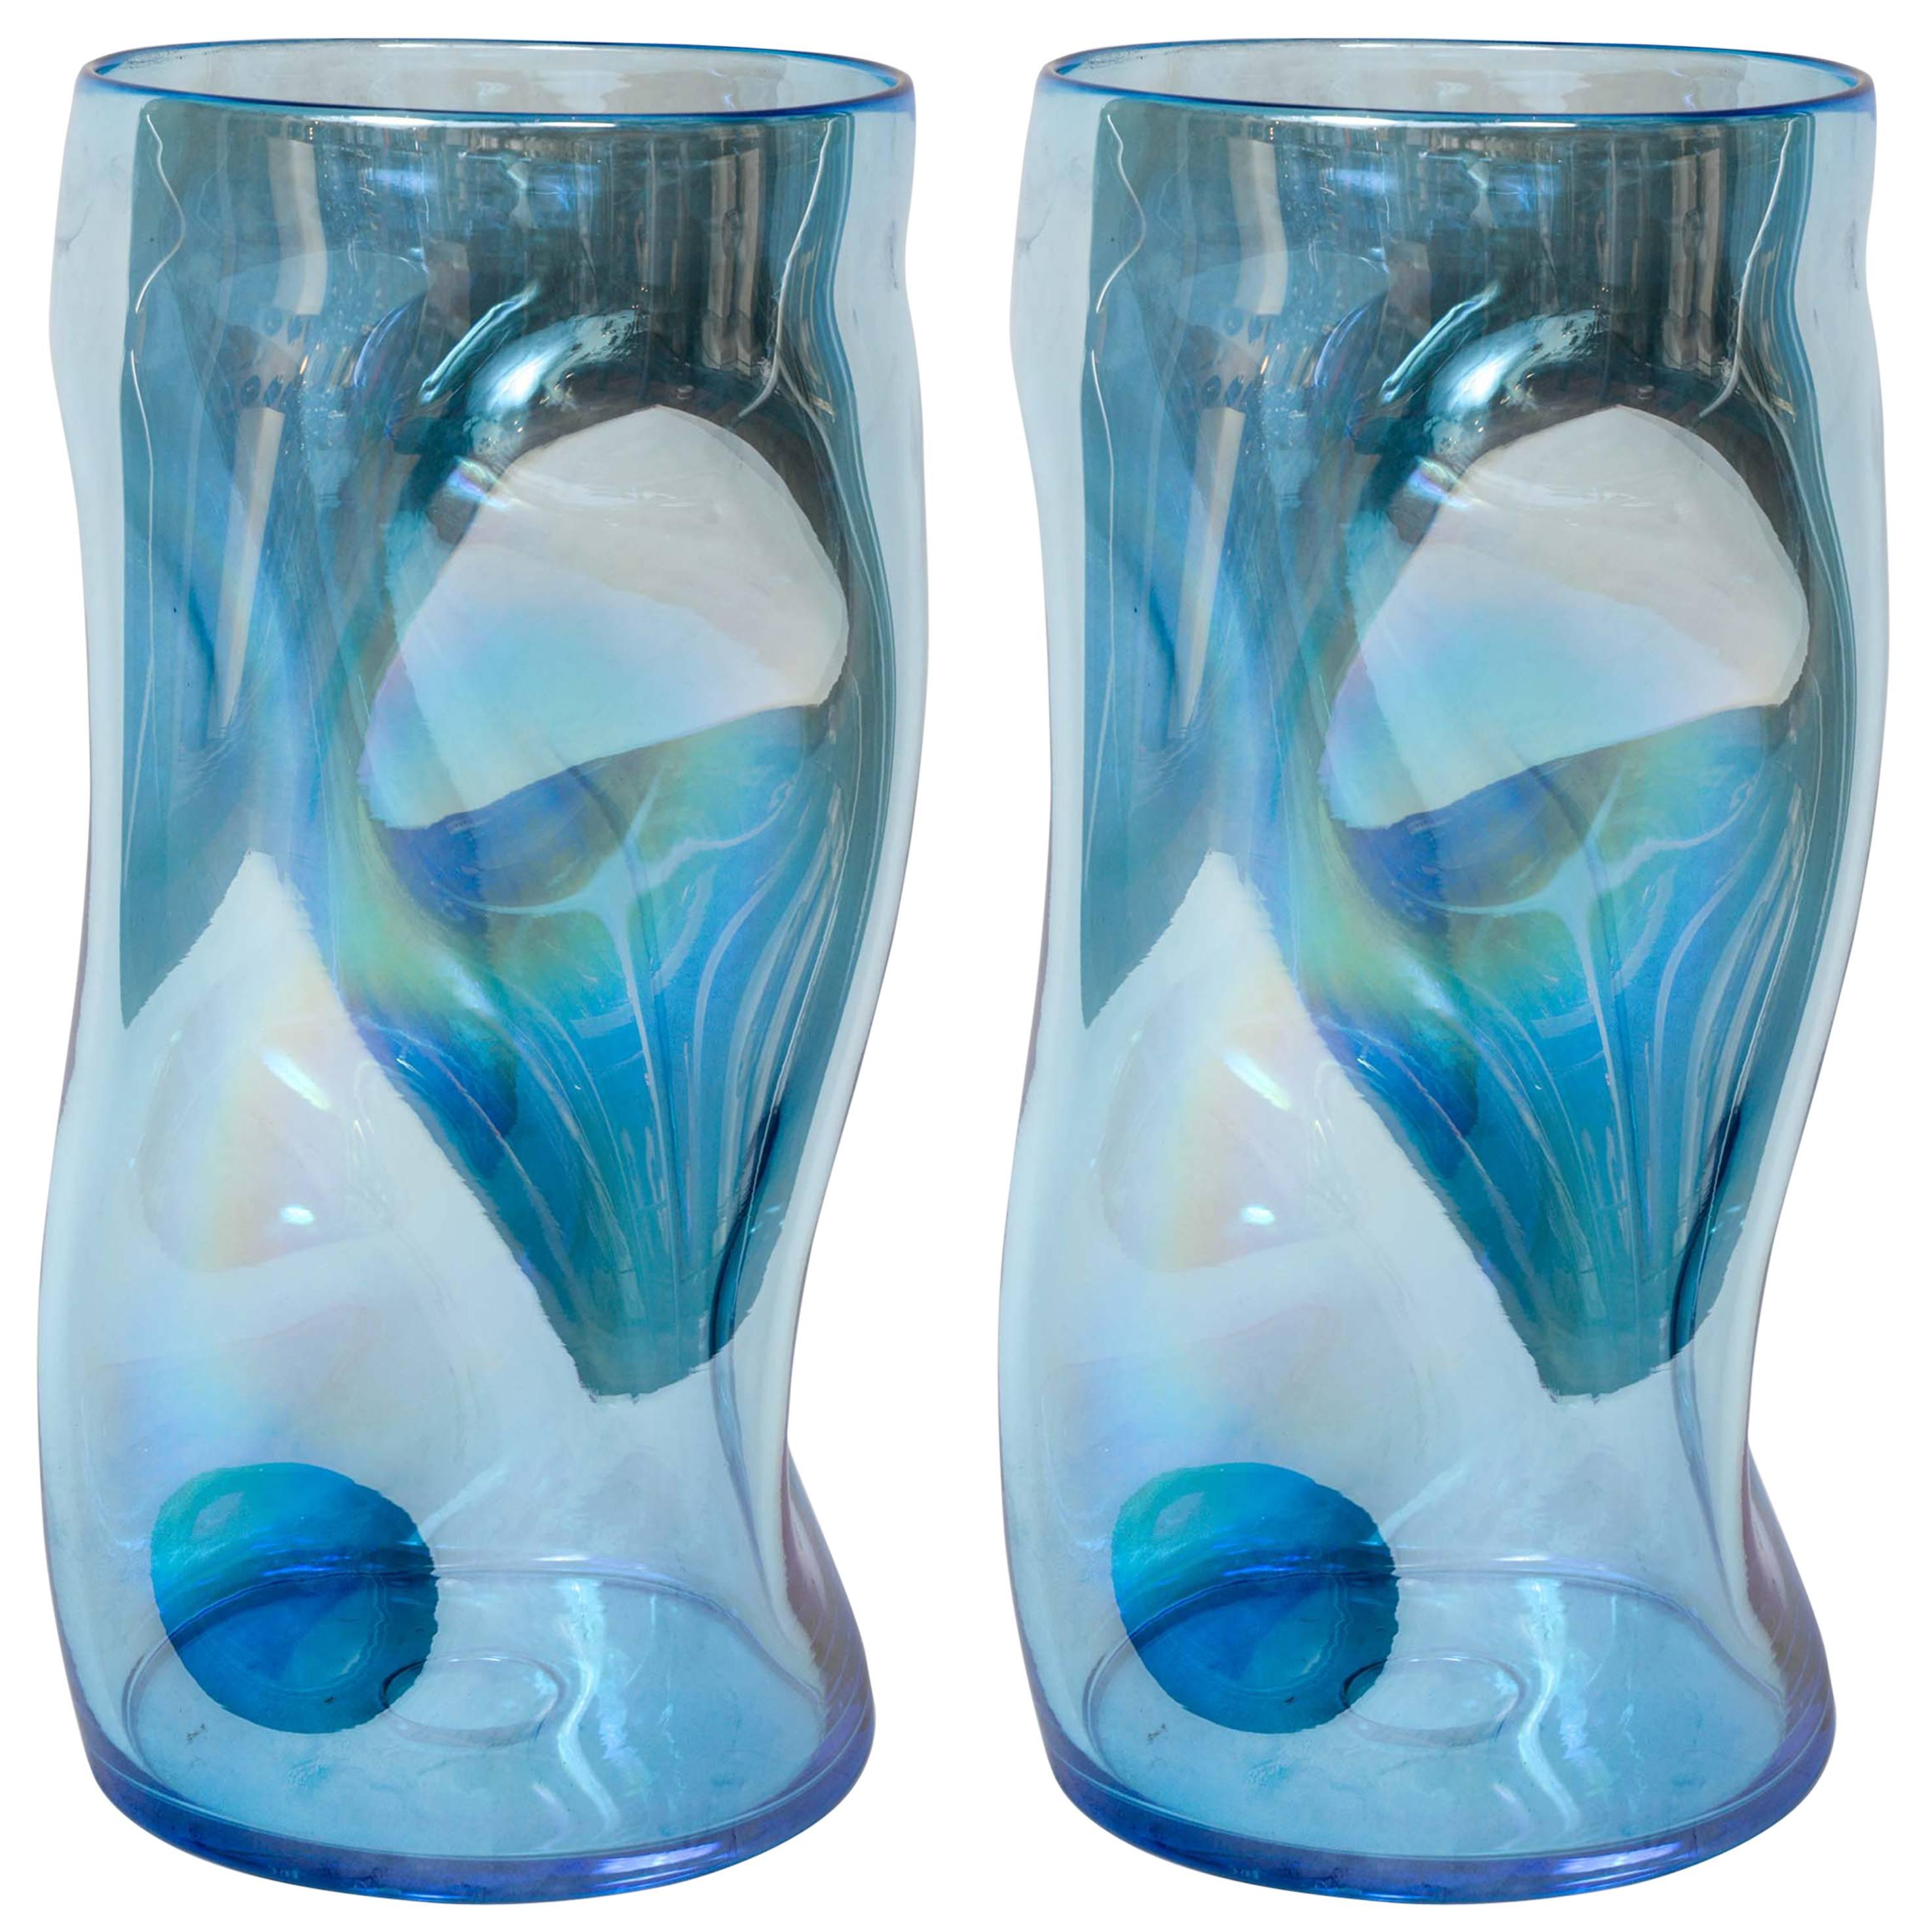 Pair of Iridescent and Curved Blue Murano Glass Vases